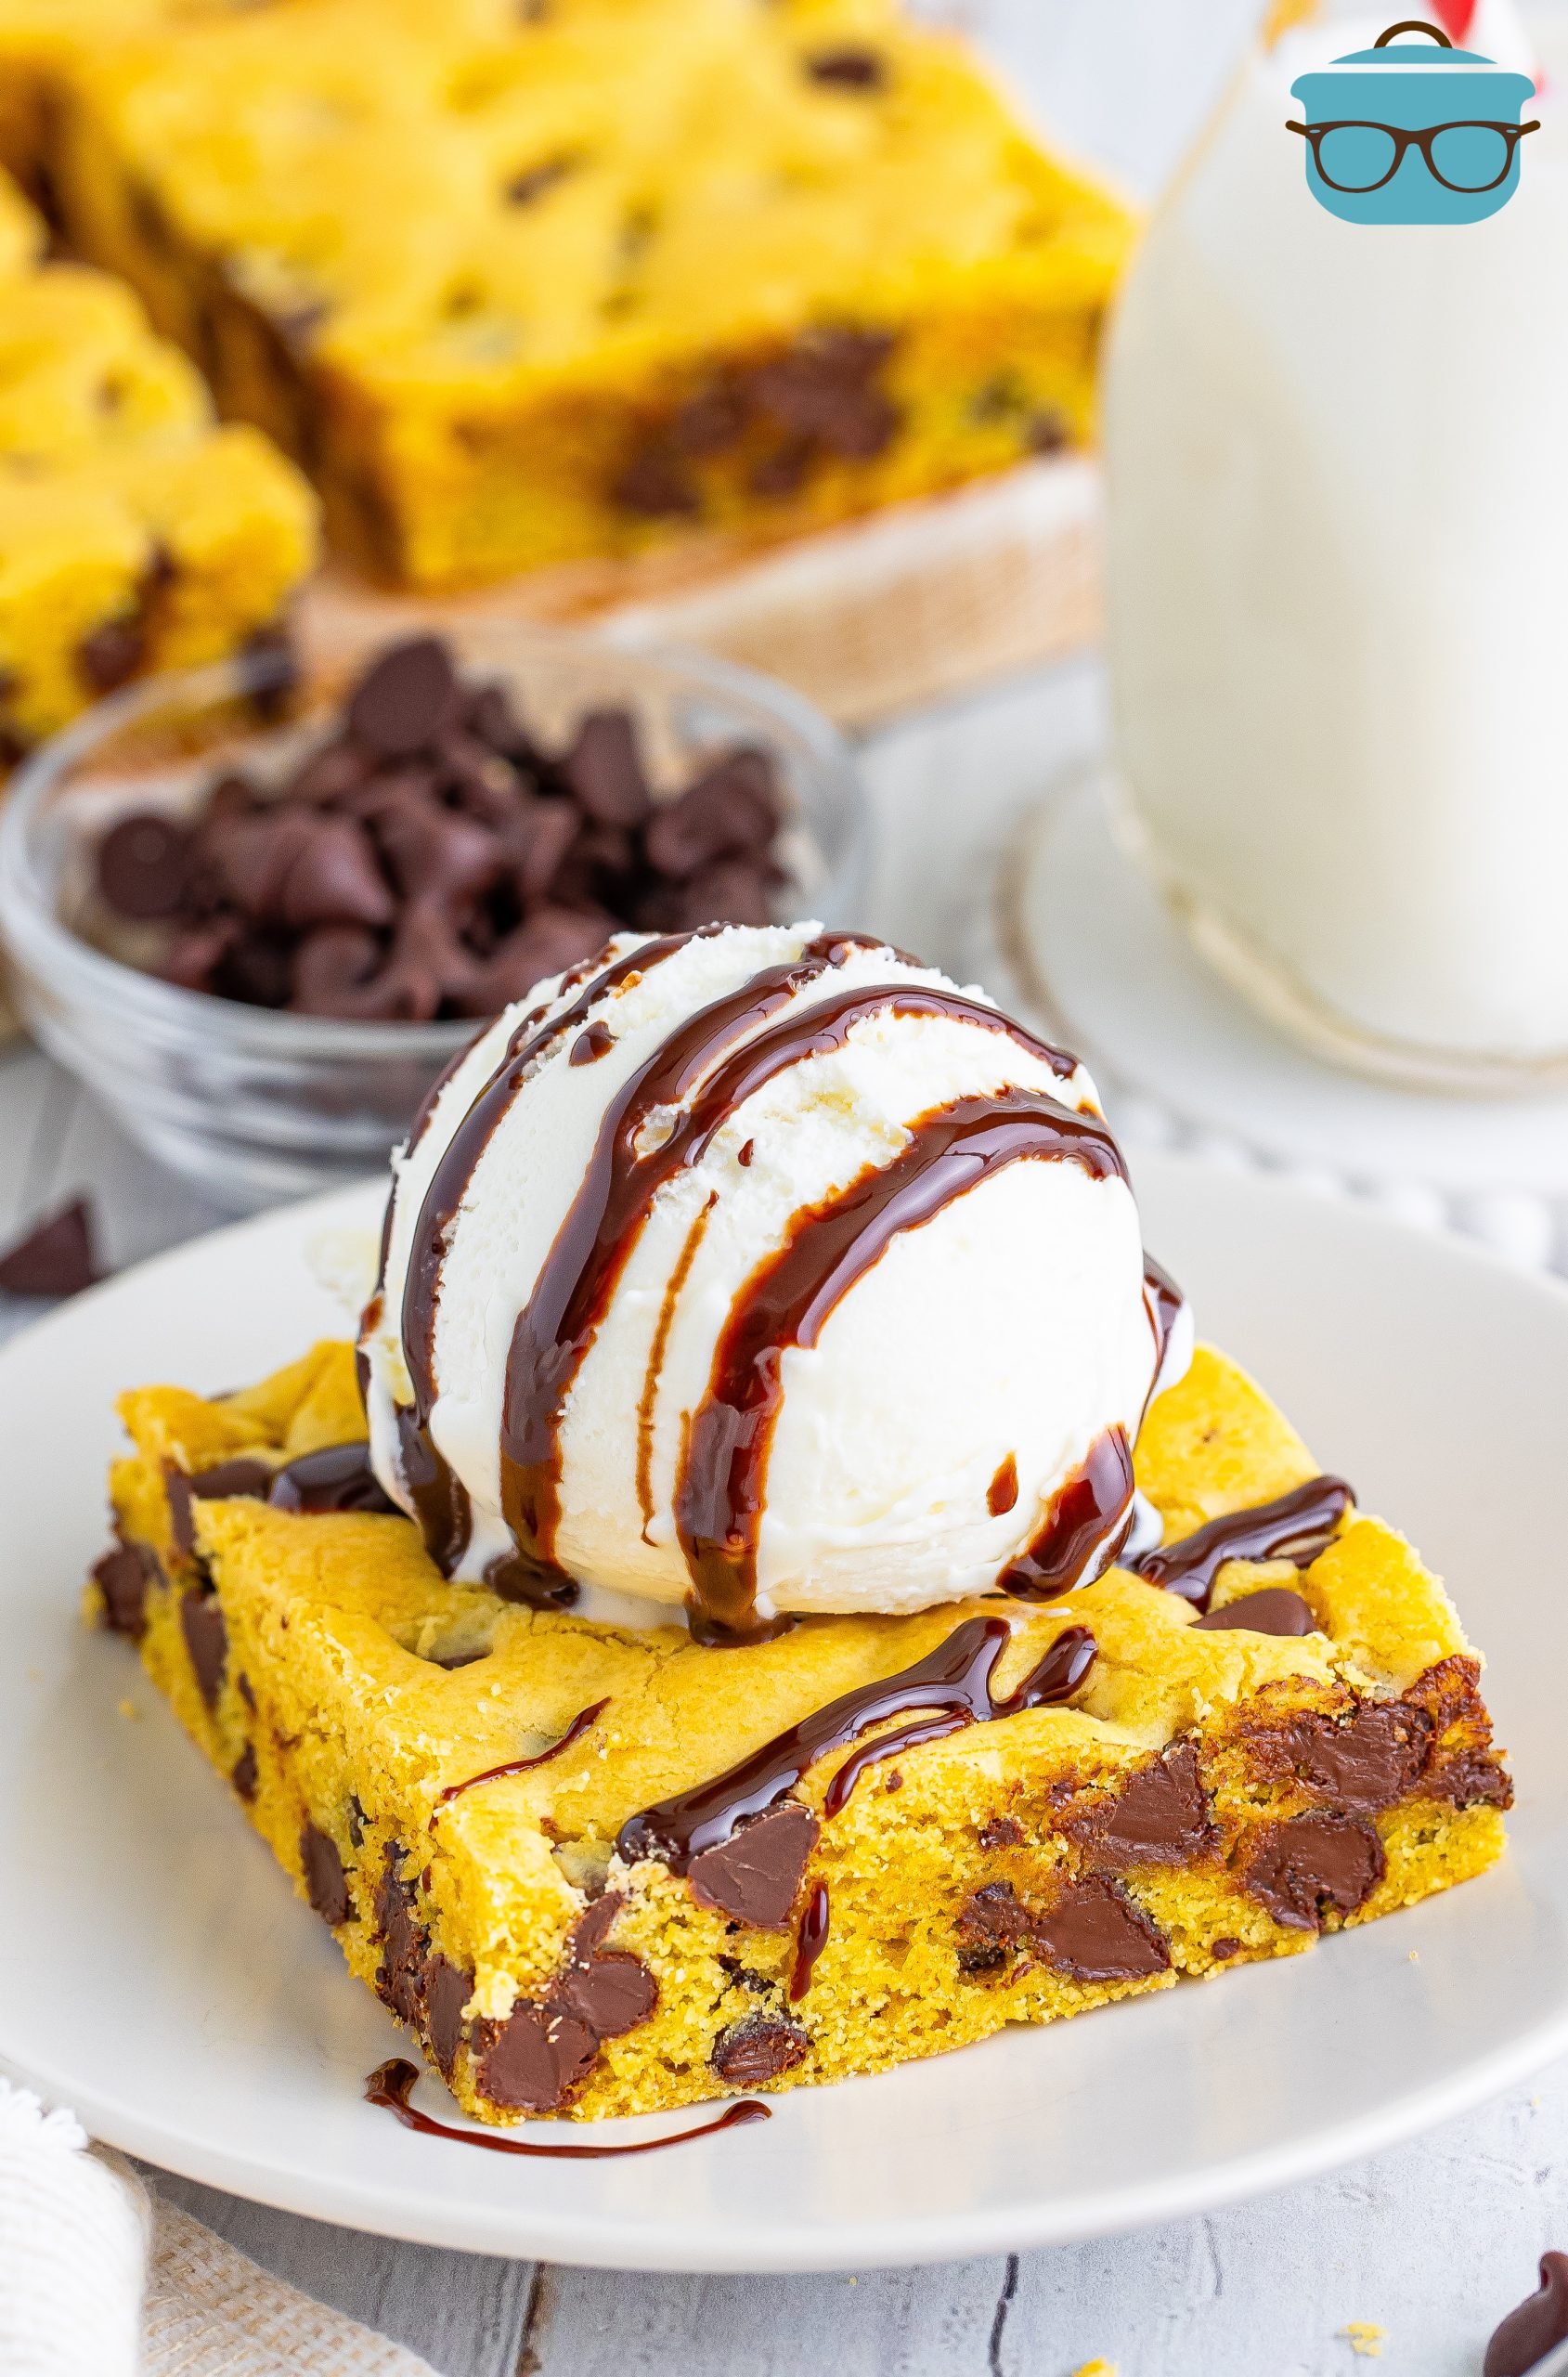 A Lazy Chocolate Chip Cookie Bar with ice cream and chocolate sauce.